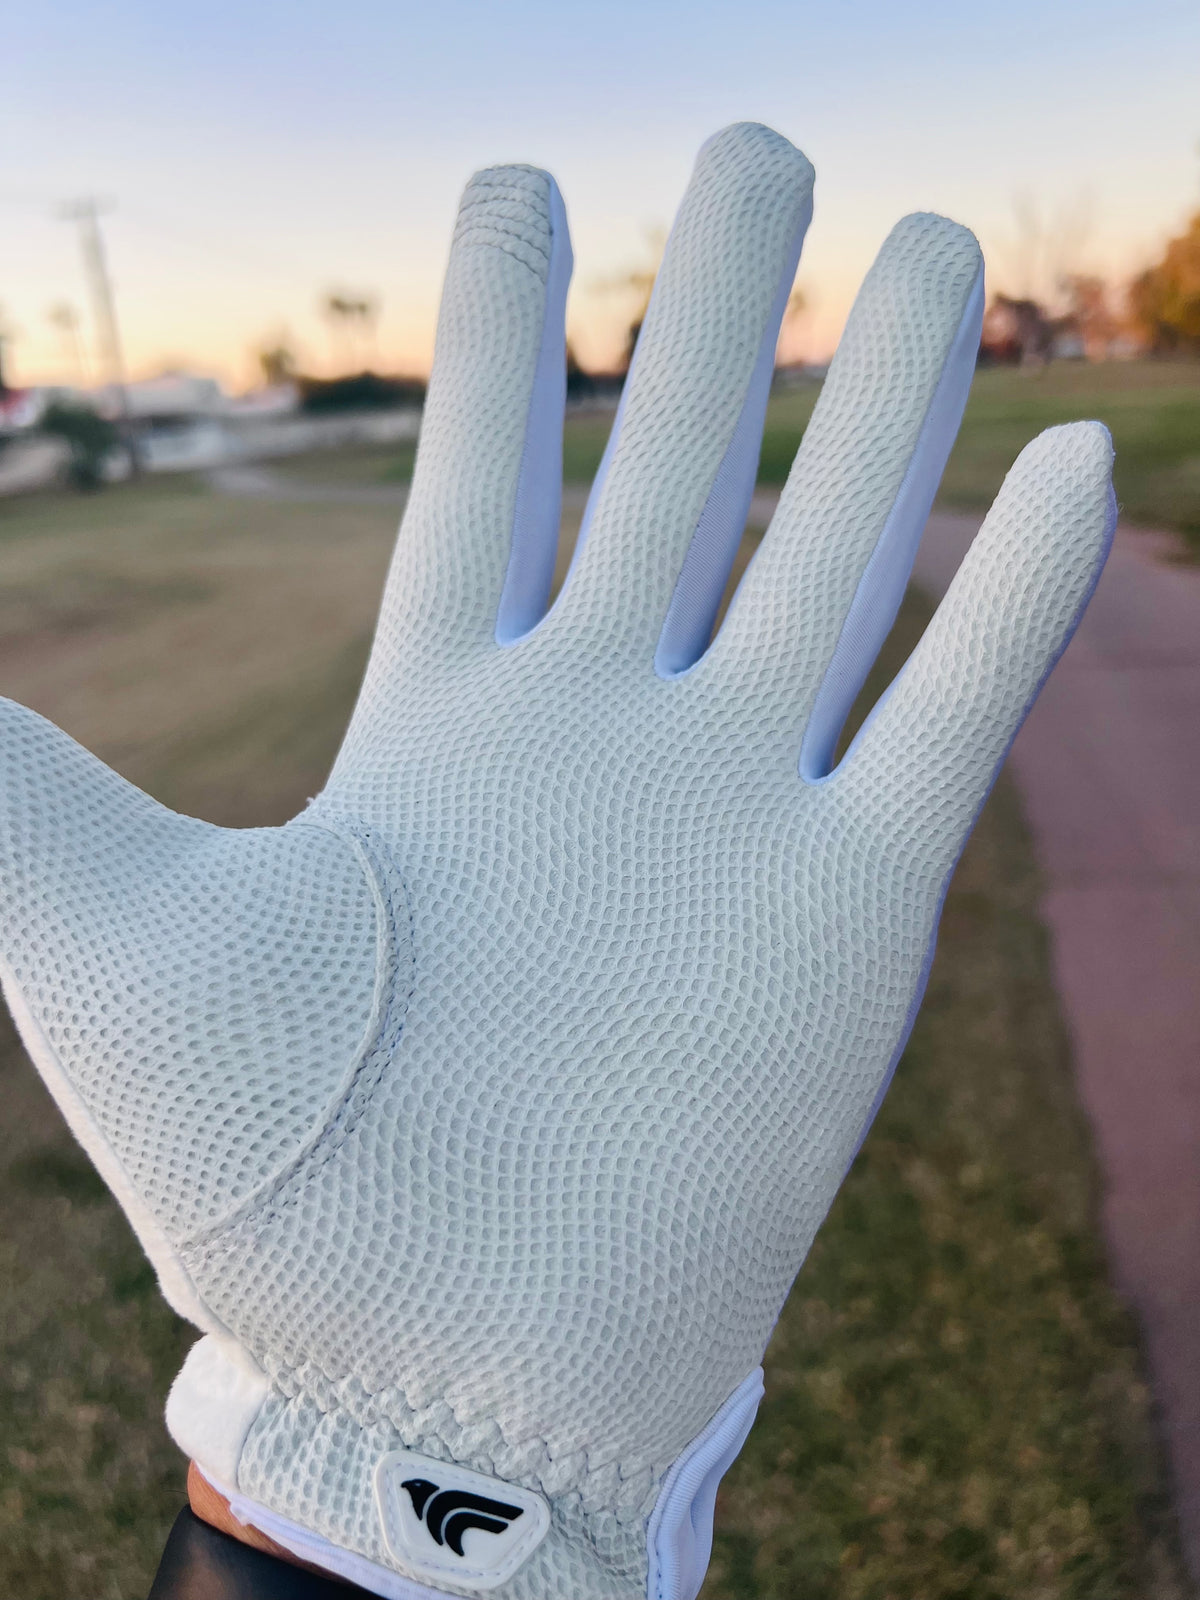 Ocean - New Traditional all White Glove